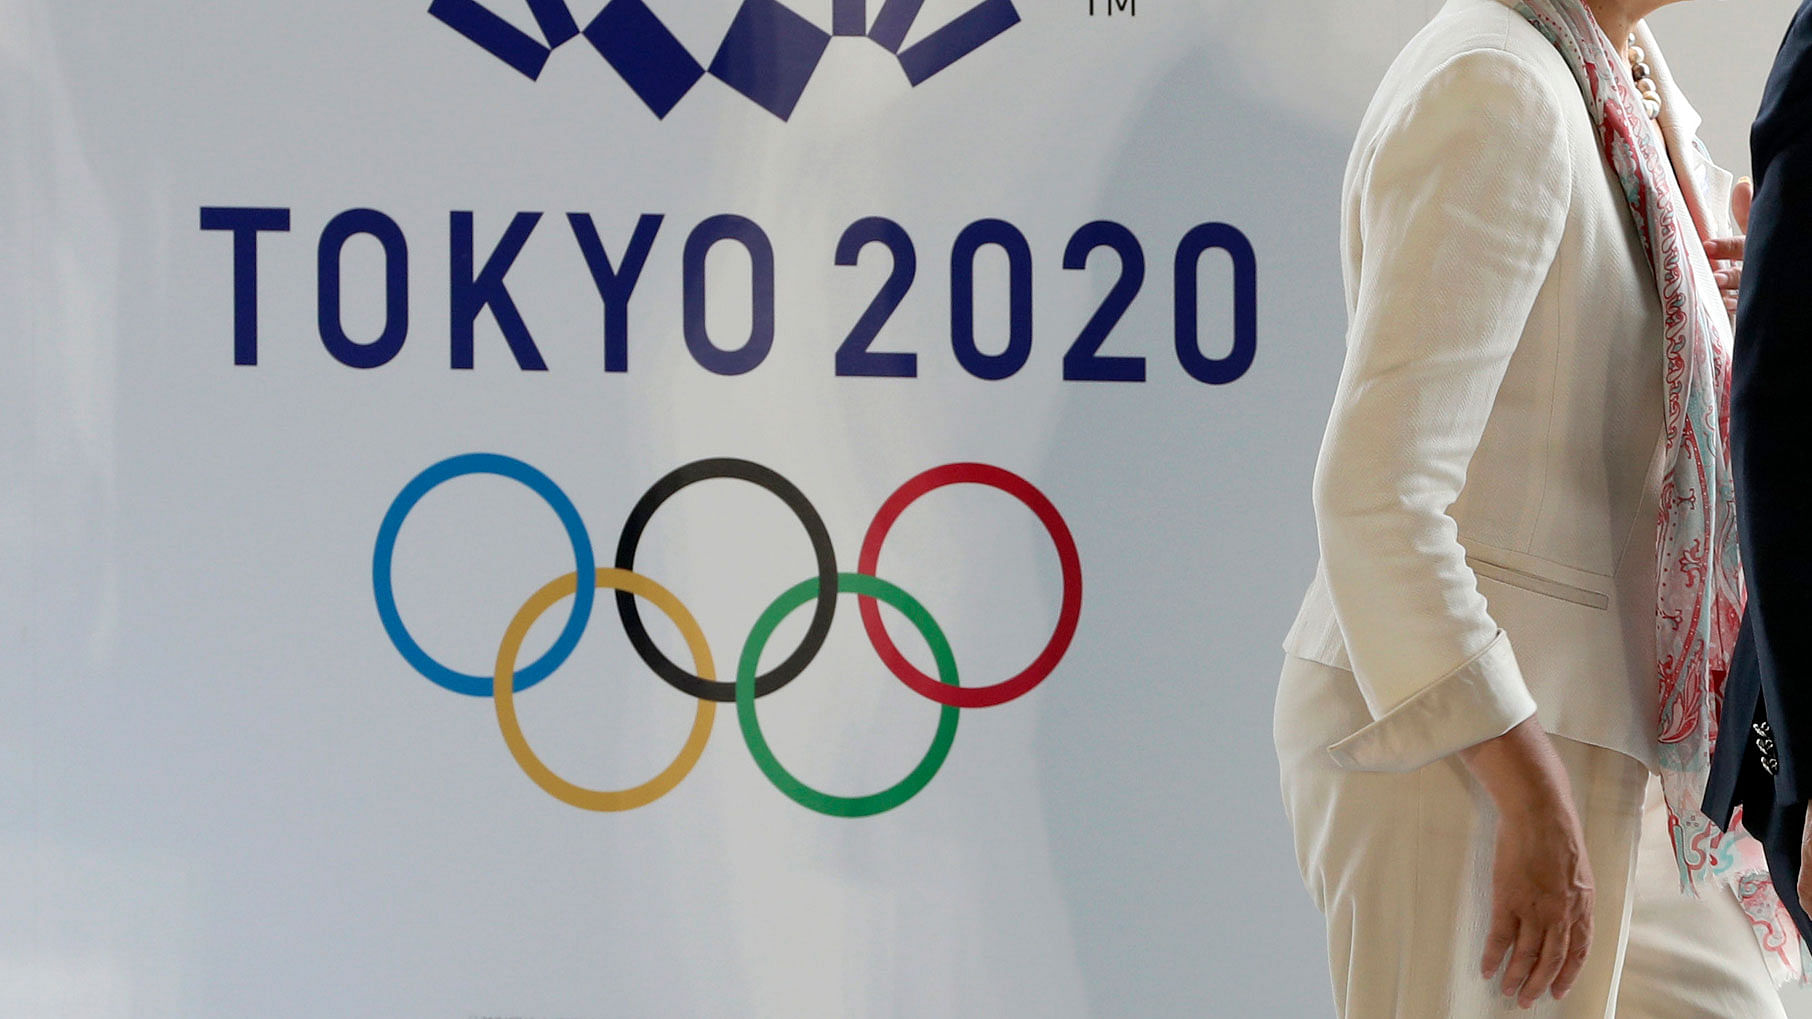 The price tag keeps soaring for the 2020 Tokyo Olympics despite local organisers and the International Olympic Committee saying that spending is being cut.